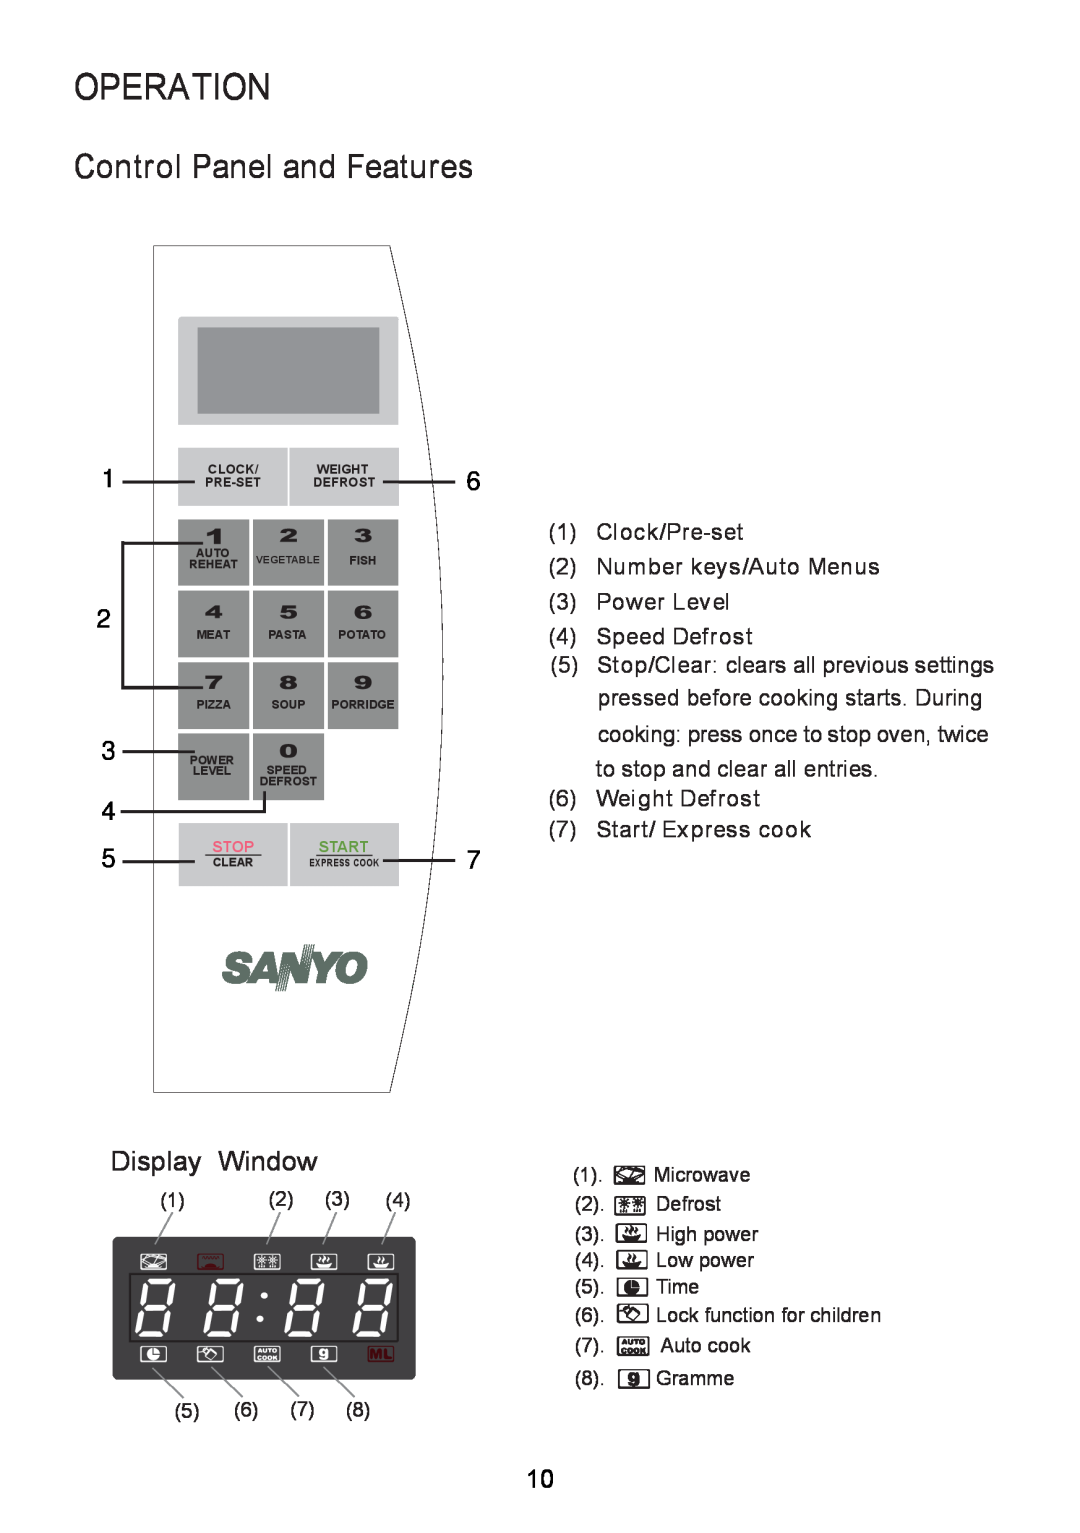 Sanyo EM-S2587W, EM-S2587V instruction manual Operation, Control Panel and Features, Display Window 